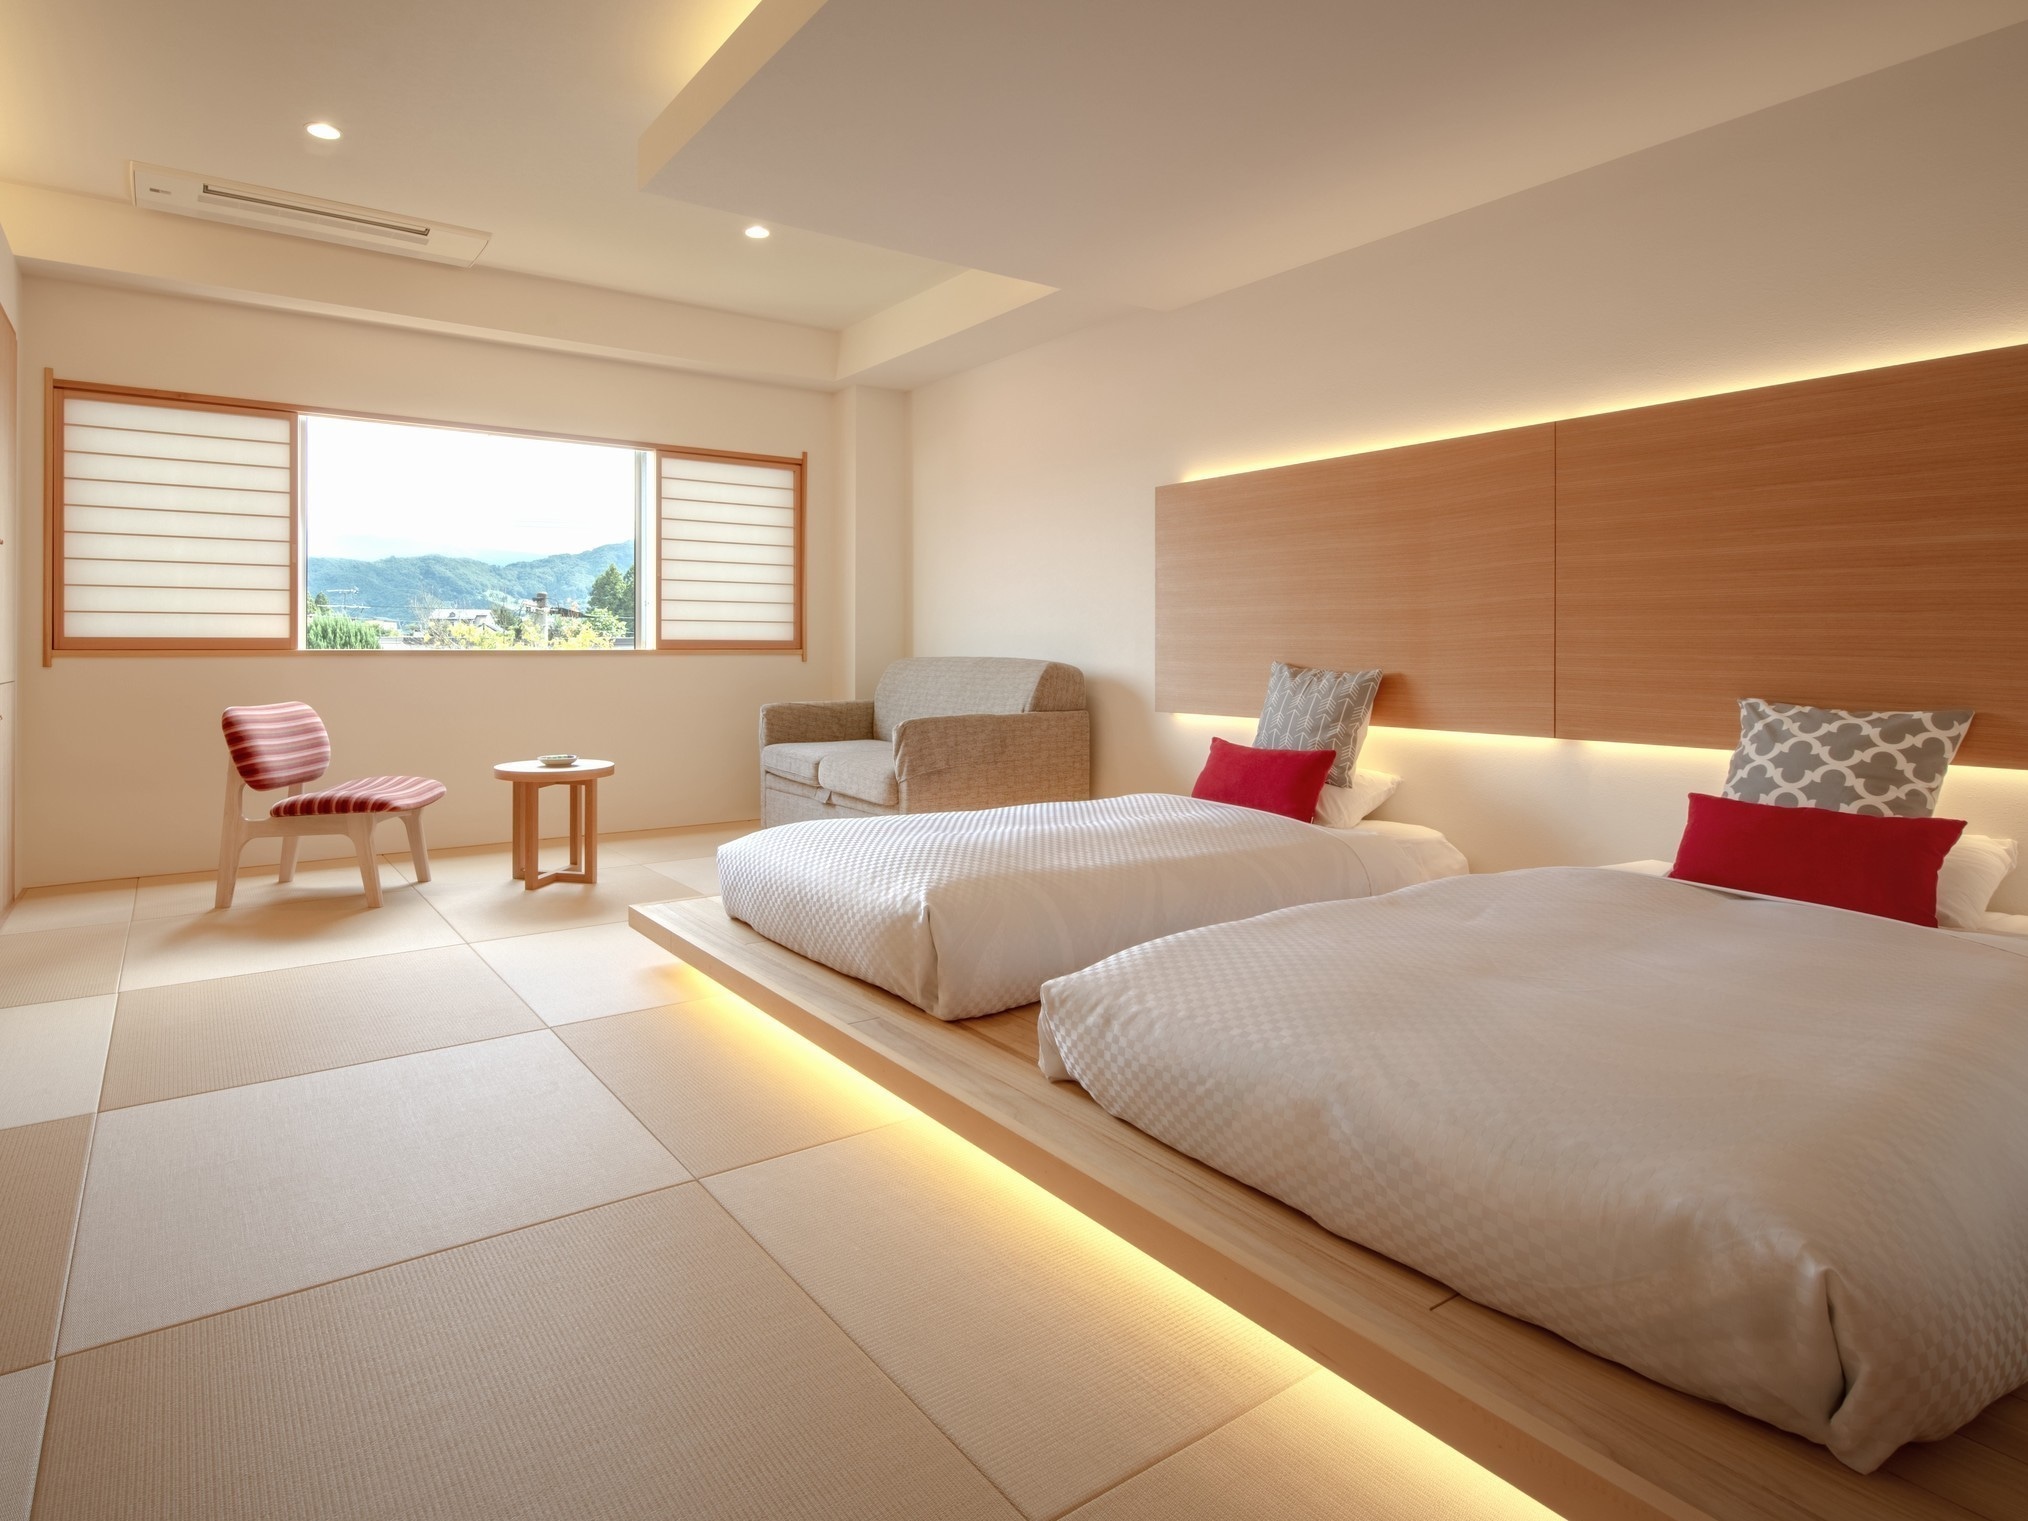 Japanese modern Japanese-style room low bed (example)